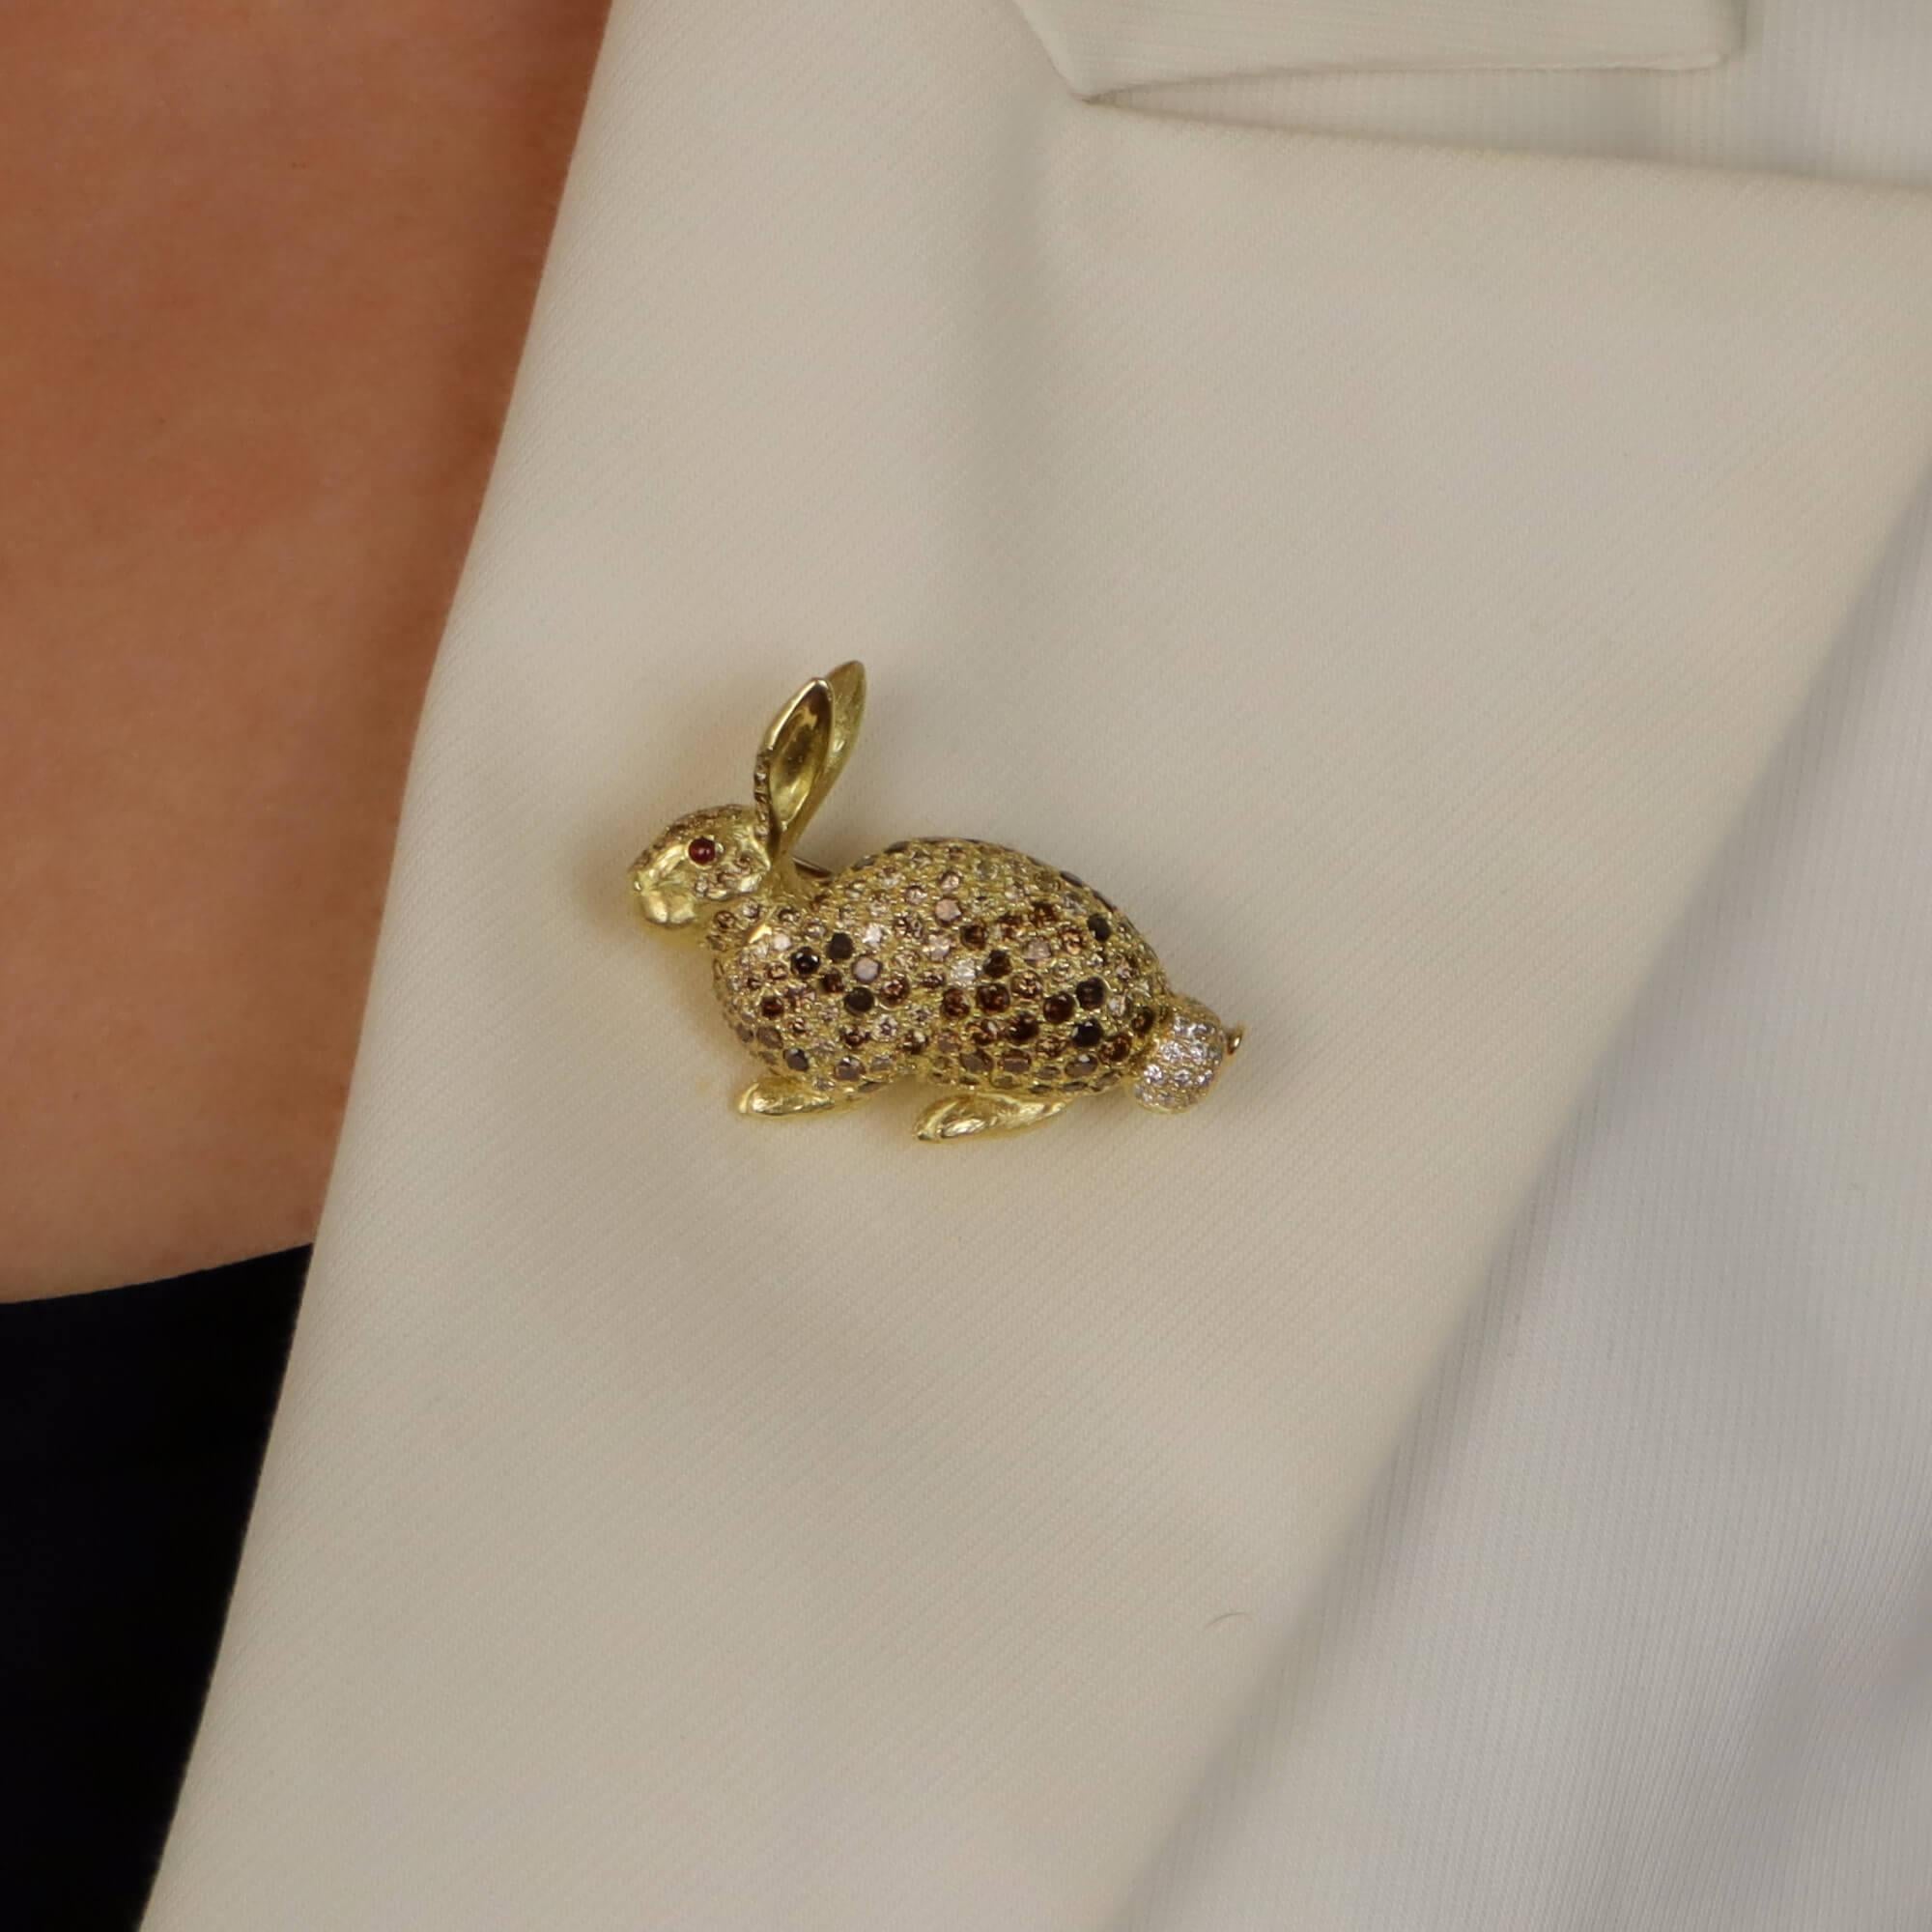 A beautiful cognac diamond and ruby rabbit pin brooch set in 18k yellow gold.

The brooch depicts a sitting rabbit and is pavé set throughout with various shades of round brilliant cut cognac diamonds. Although completely set with stones, the maker